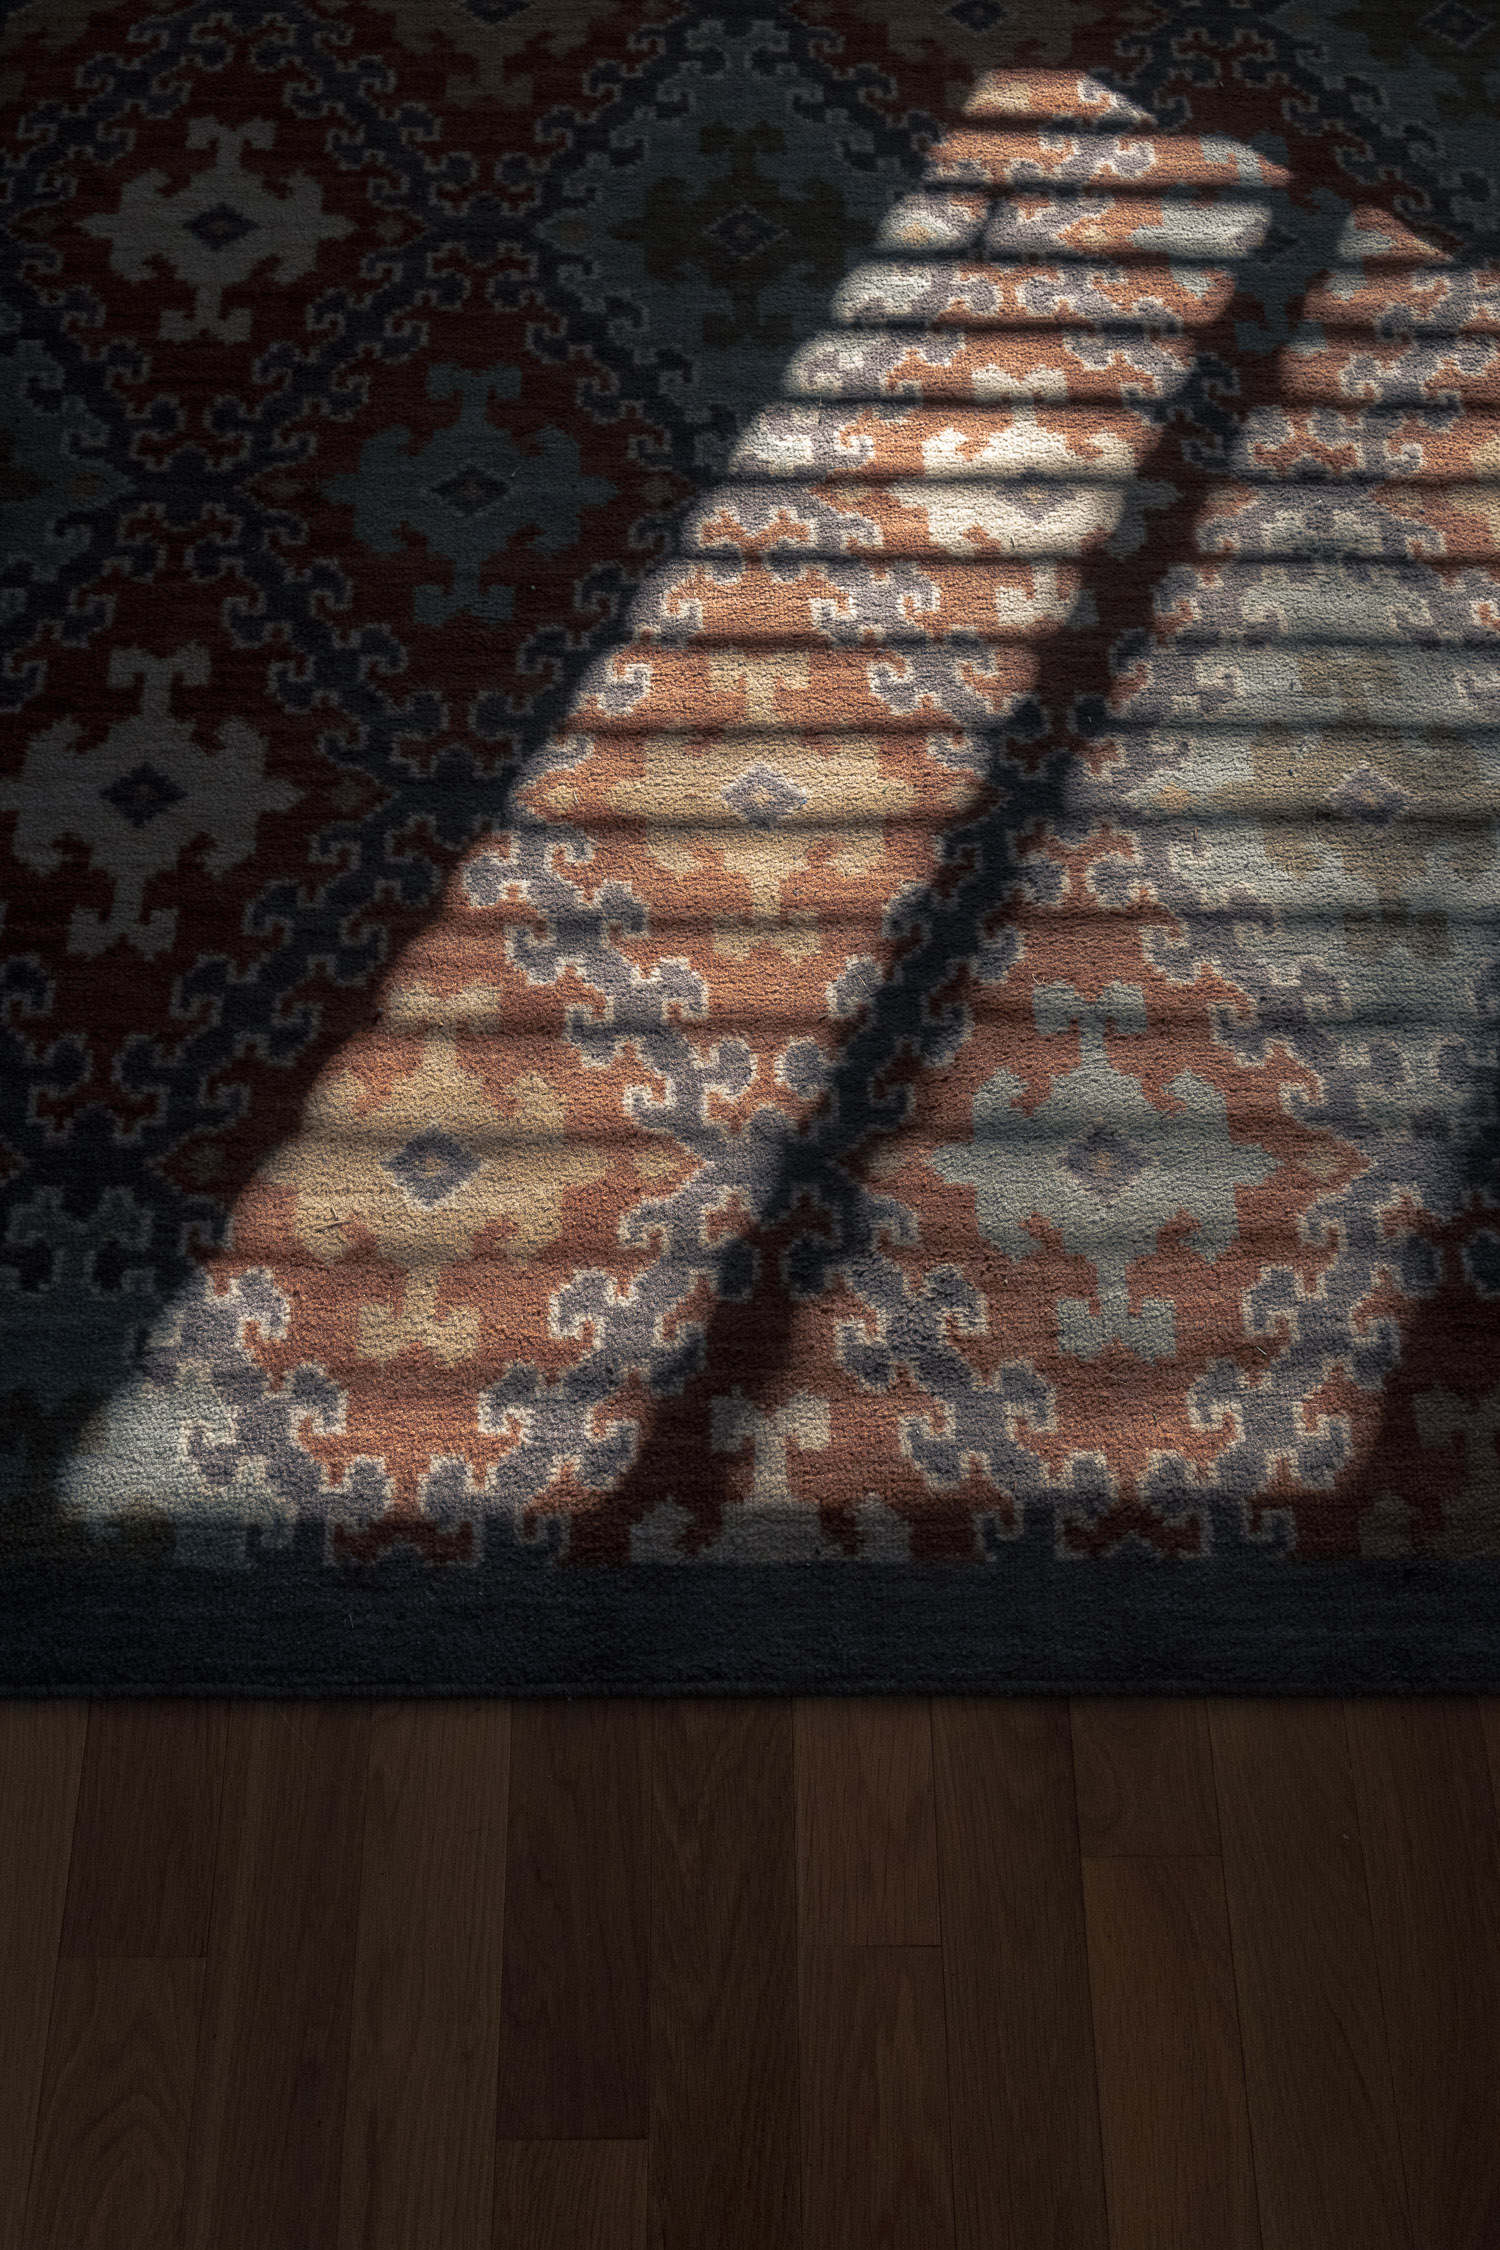 Afternoon light. Light and shadow on a rug.